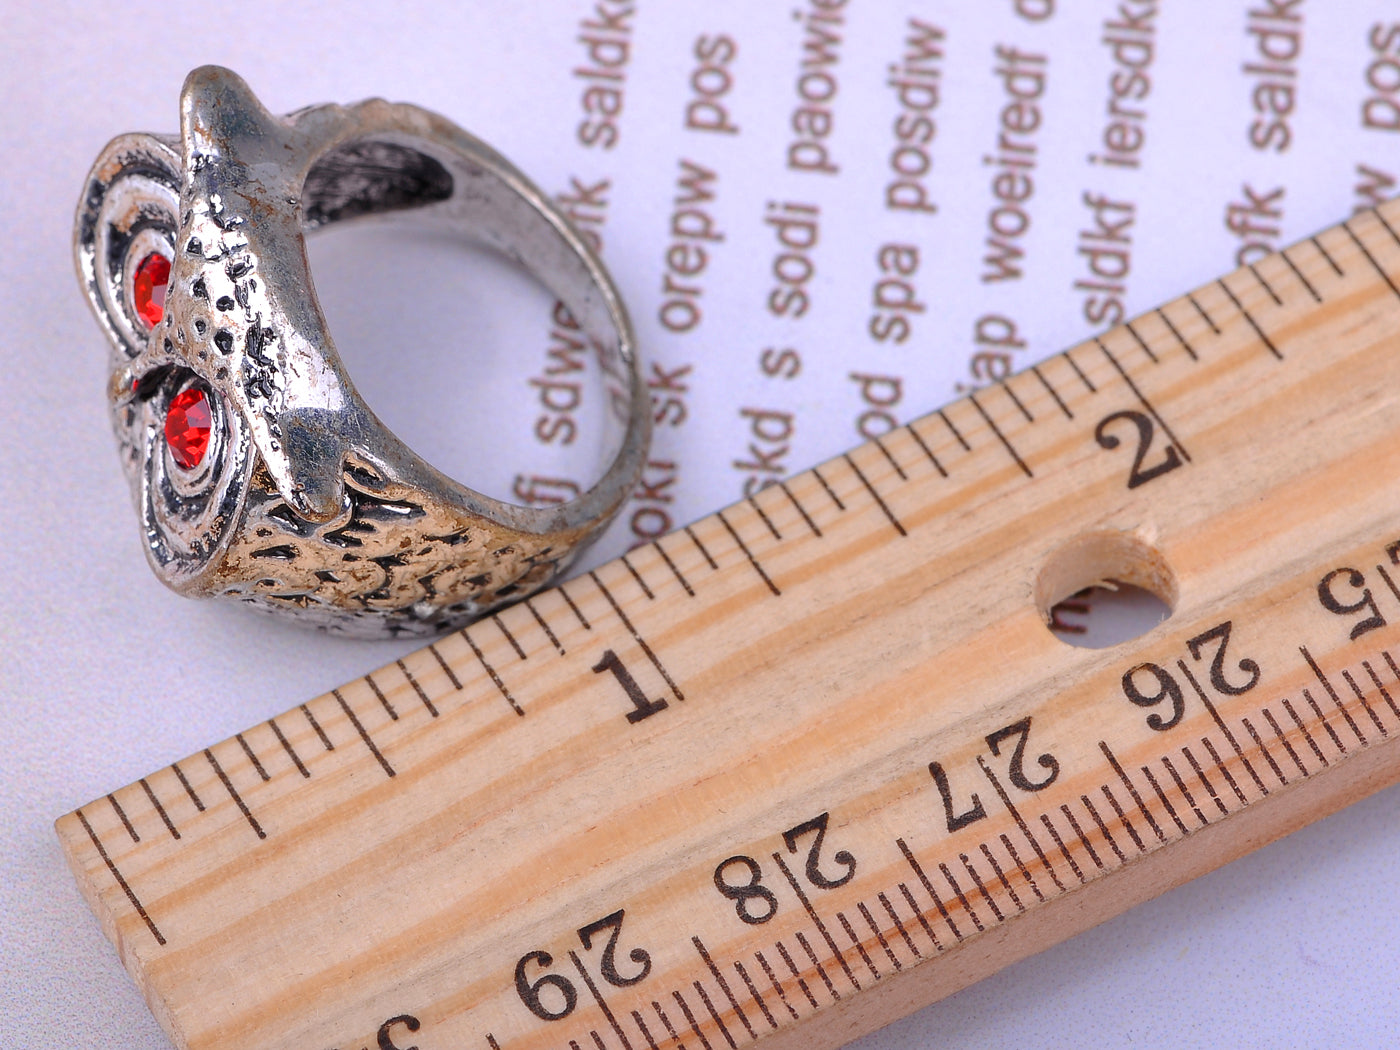 Reproduct Brand New Ruby Eyed Owl Sized Ring